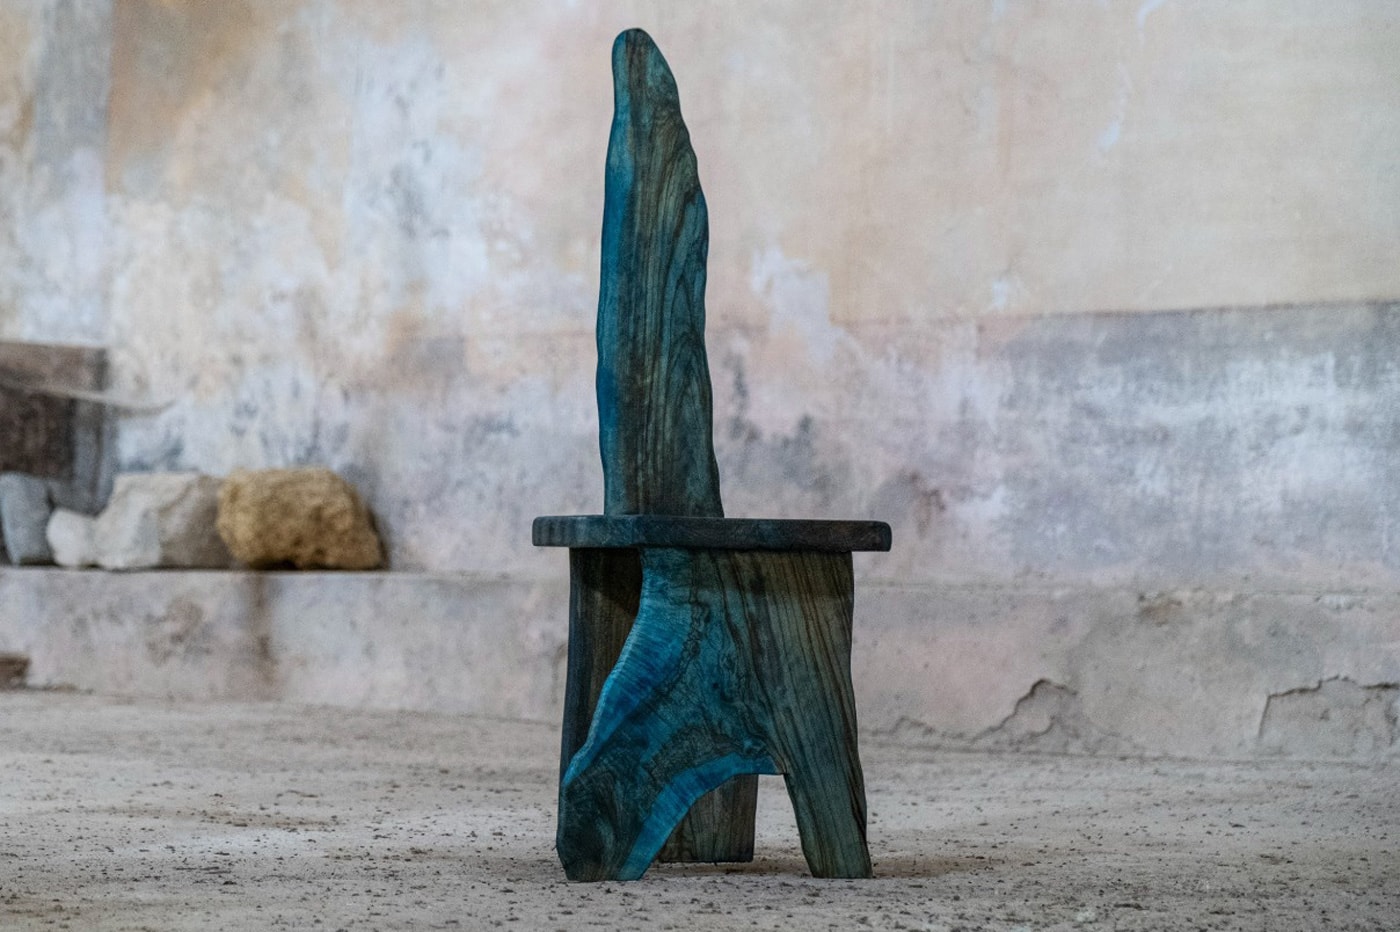 Galerie Philia Presents Gallery-Worthy Furniture Designed by Children